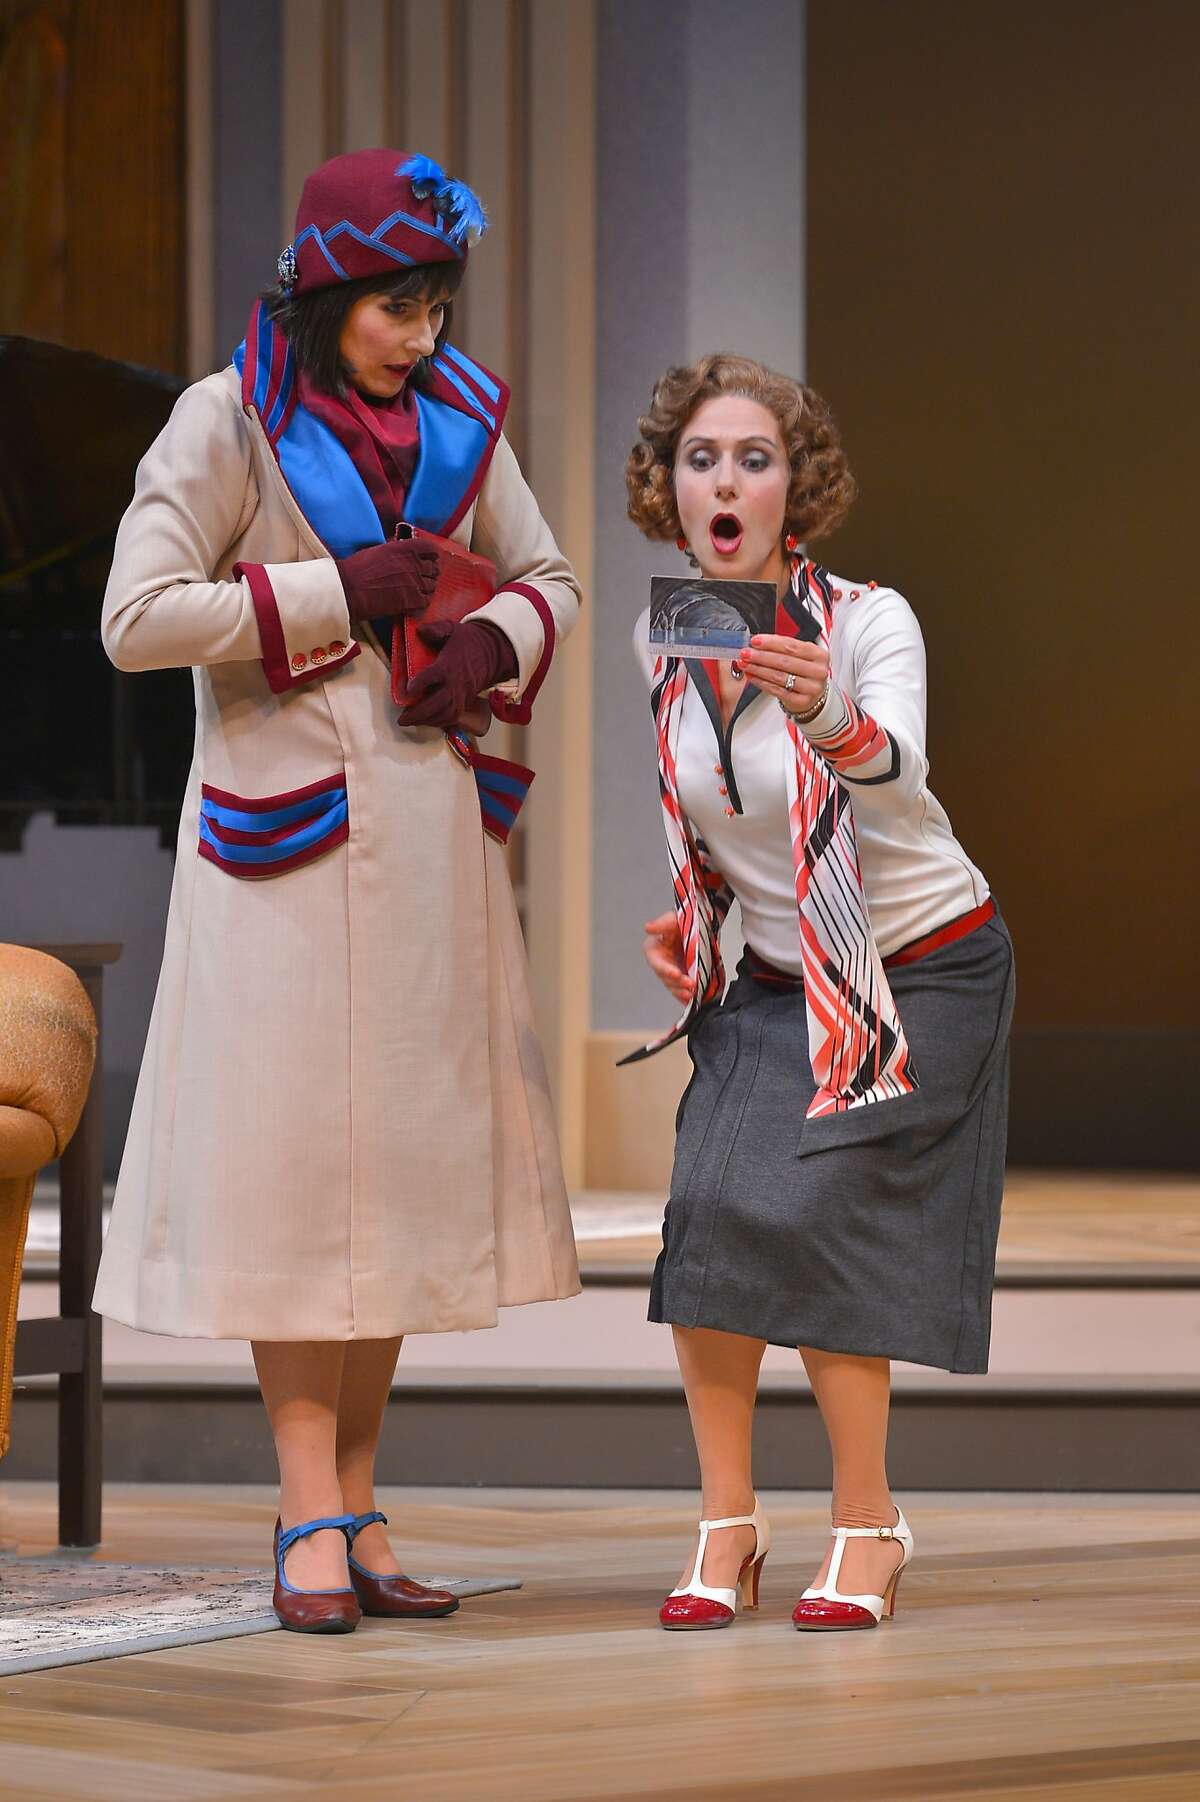 Disaffected wives Jane (Rebecca Dines, left) and Julia (Sarah Overman) receive a postcard from former mutual lover Maurice while their husbands are out of town in "Fallen Angels" at TheatreWorks